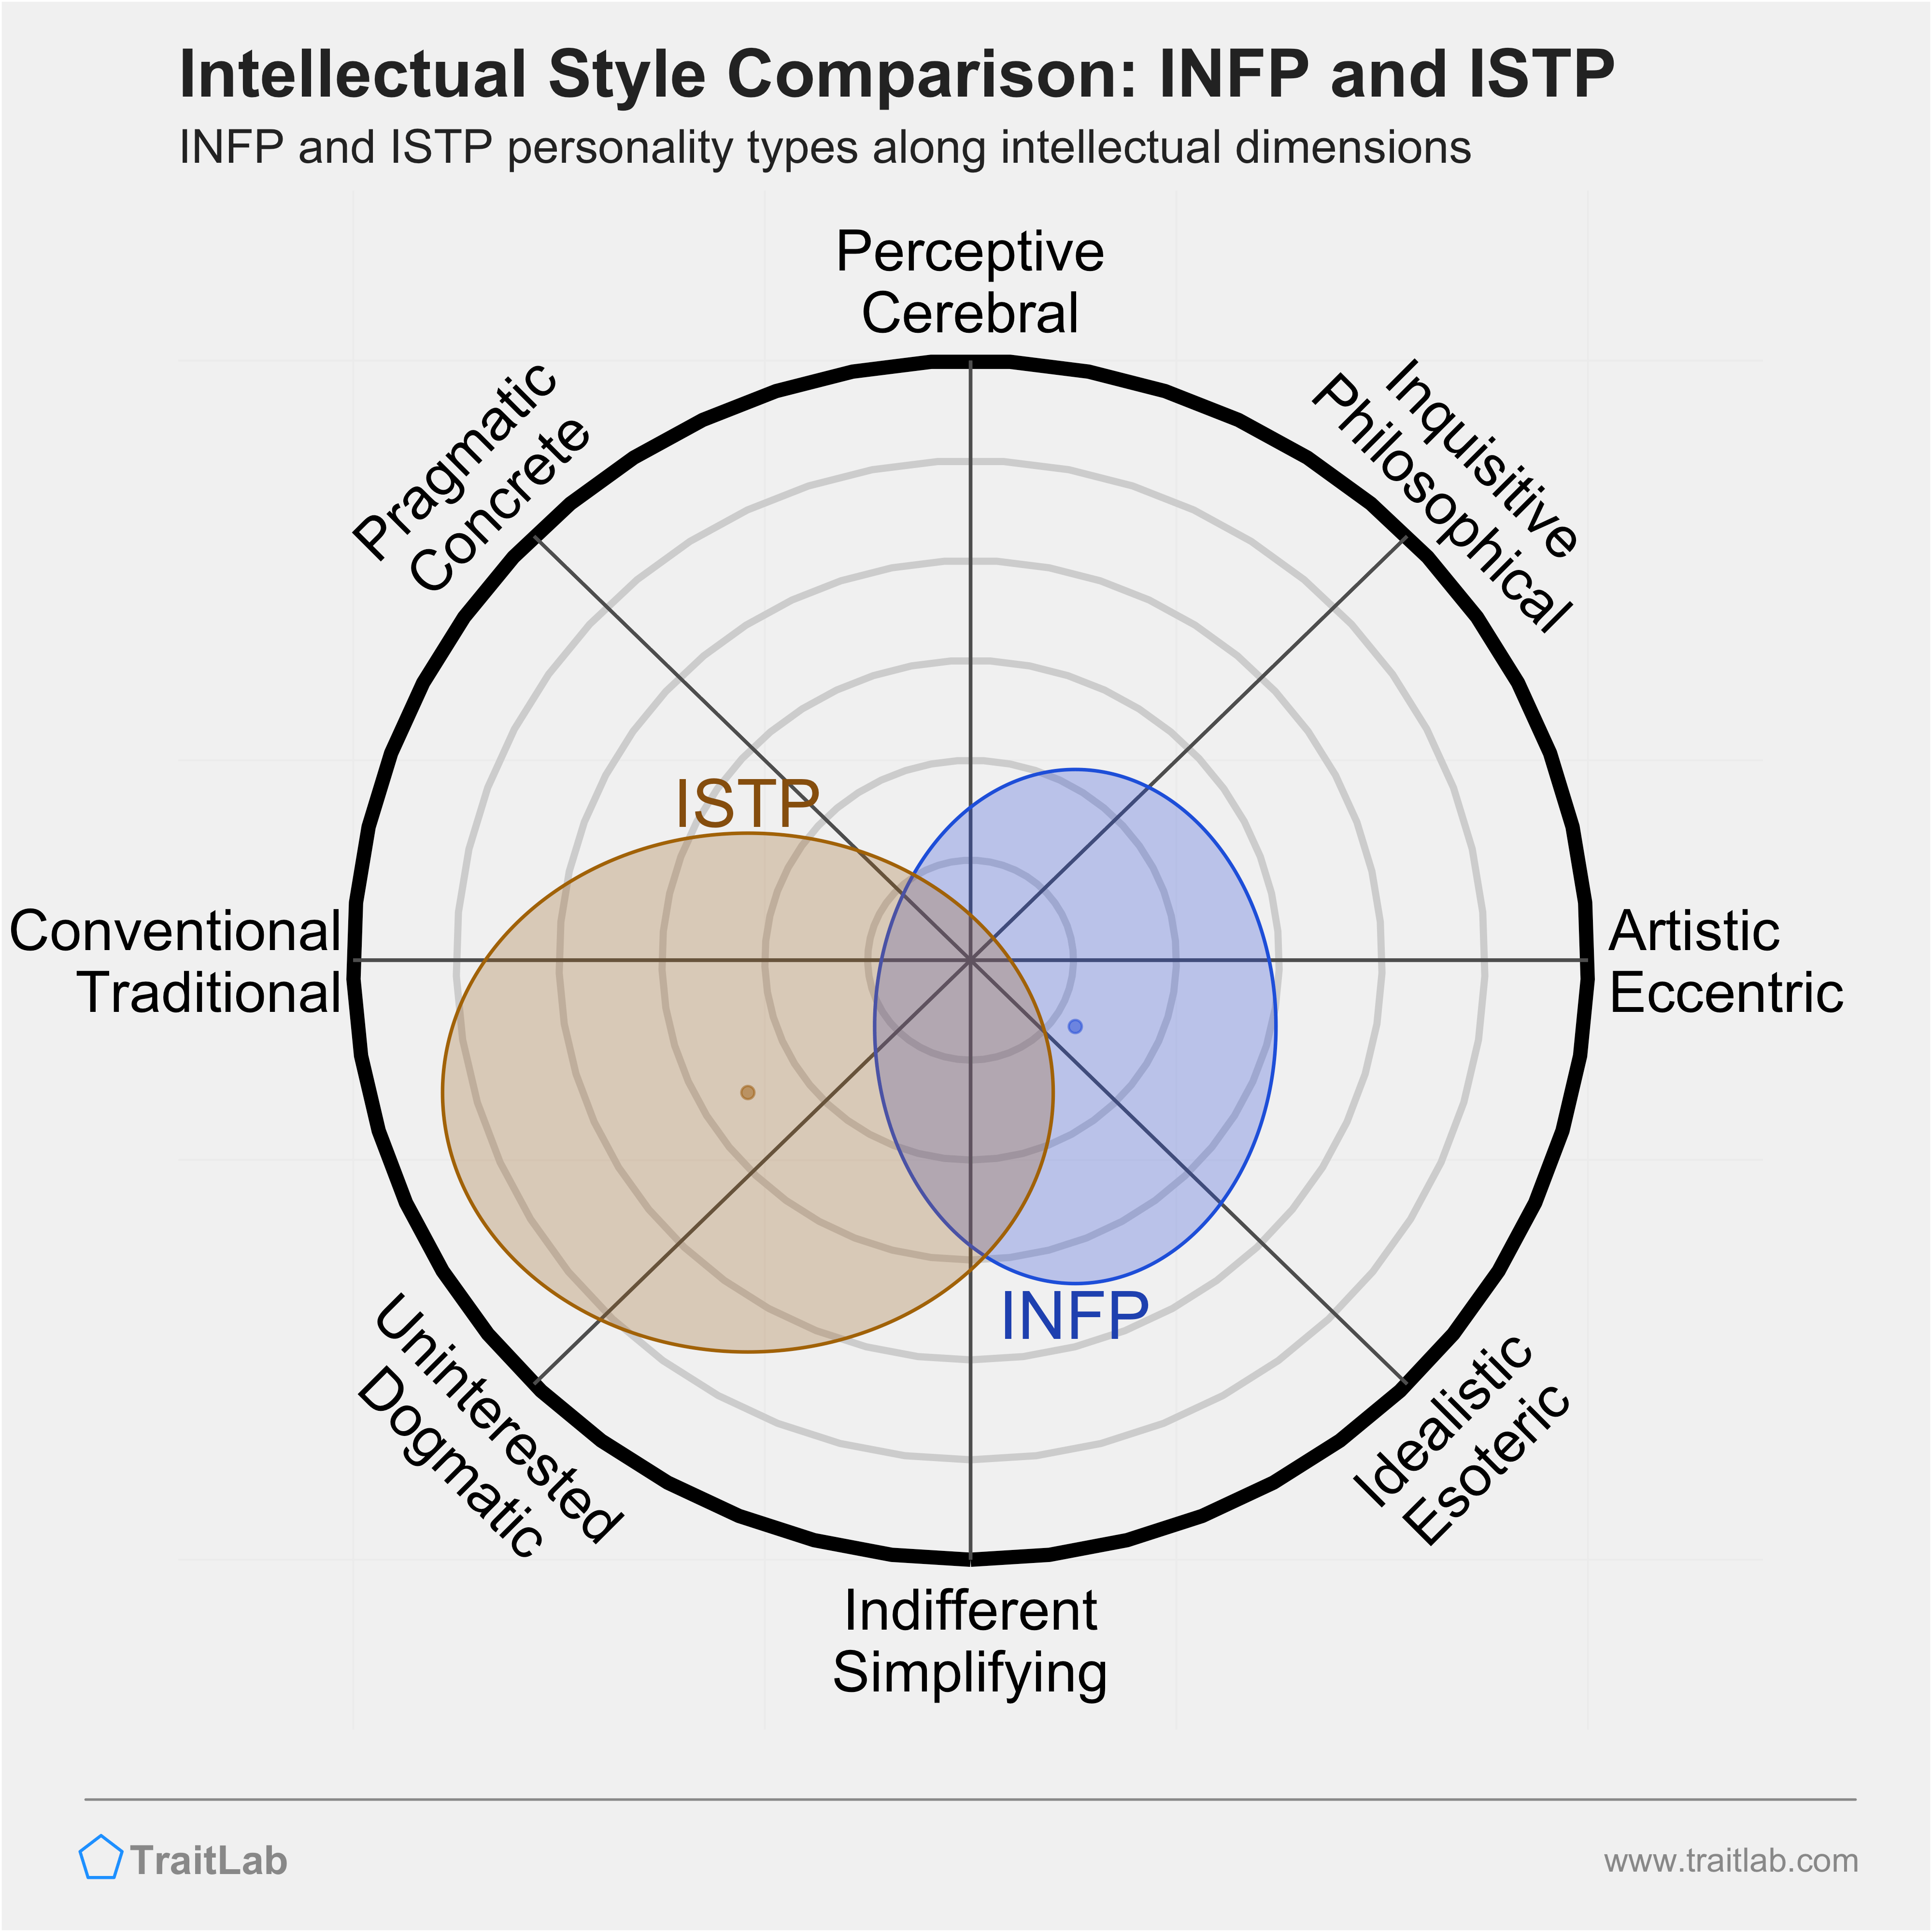 INFP and ISTP comparison across intellectual dimensions